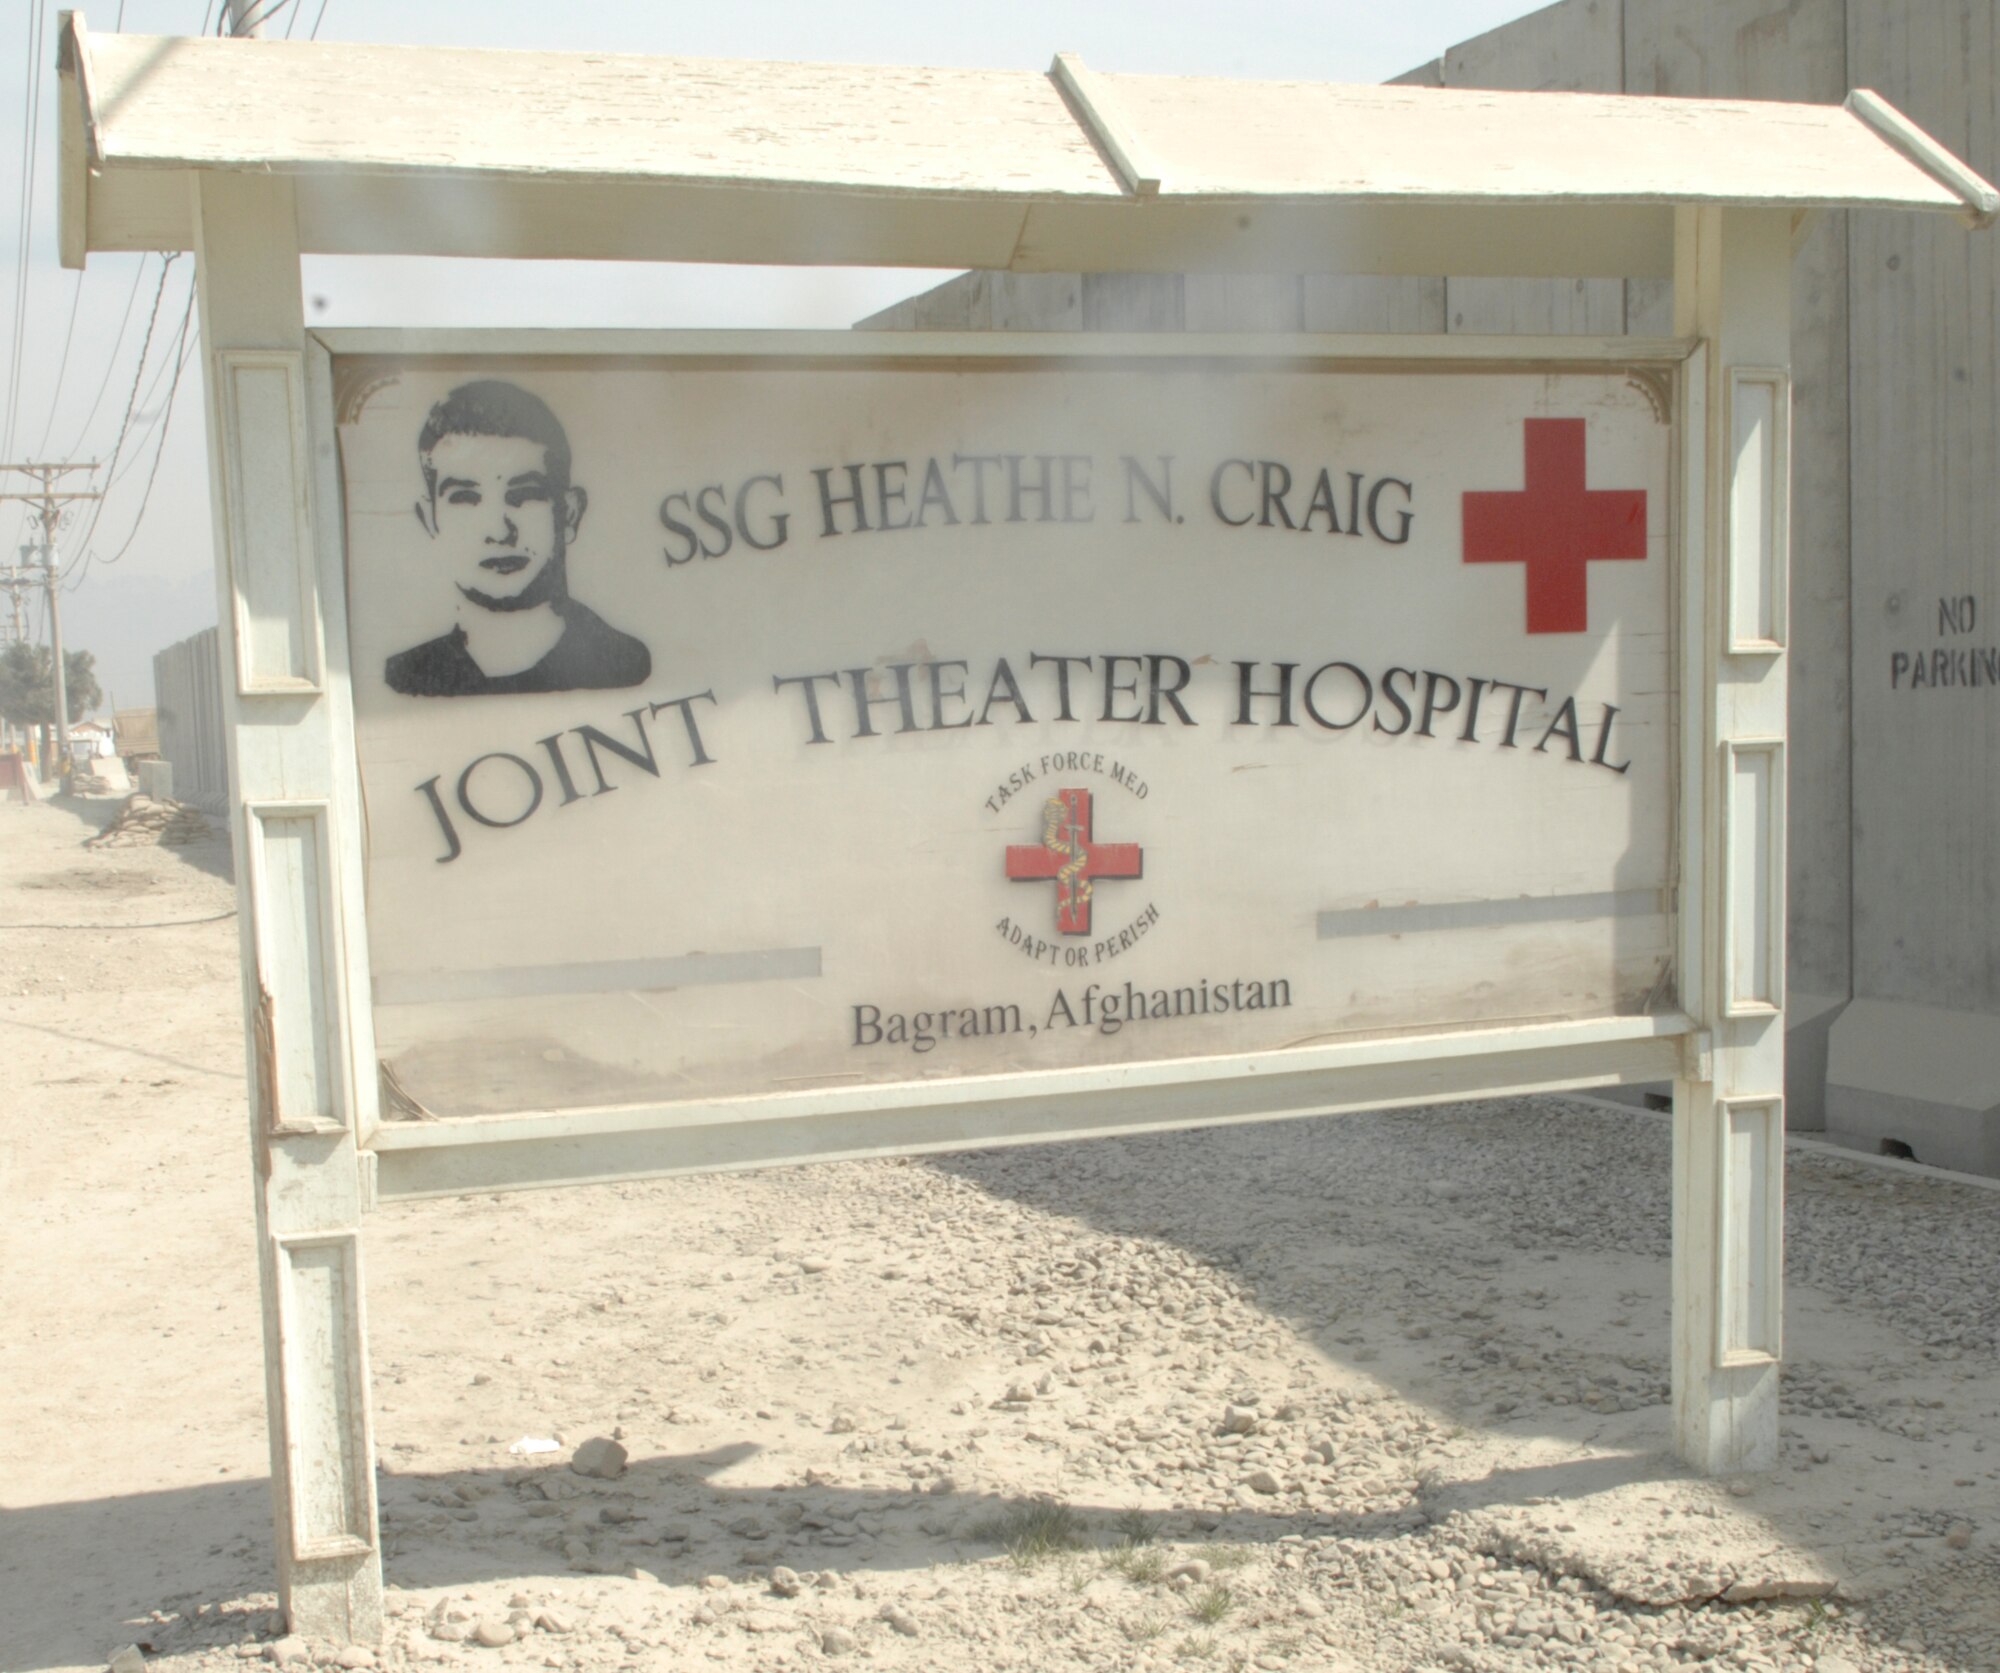 The Craig Joint Theater Hospital at Bagram Airfield, Afghanistan is named after Army Staff Sgt. Heathe N. Craig. In 2006, Sergeant Craig, a medic from the 159th Medical Company, 10th Mountain Division, was evacuating a patient into a UH-60 helicopter, but the line snapped and both were killed in the fall. (U.S. Air Force photo/Senior Airman Amber R. Kelly-Herard)